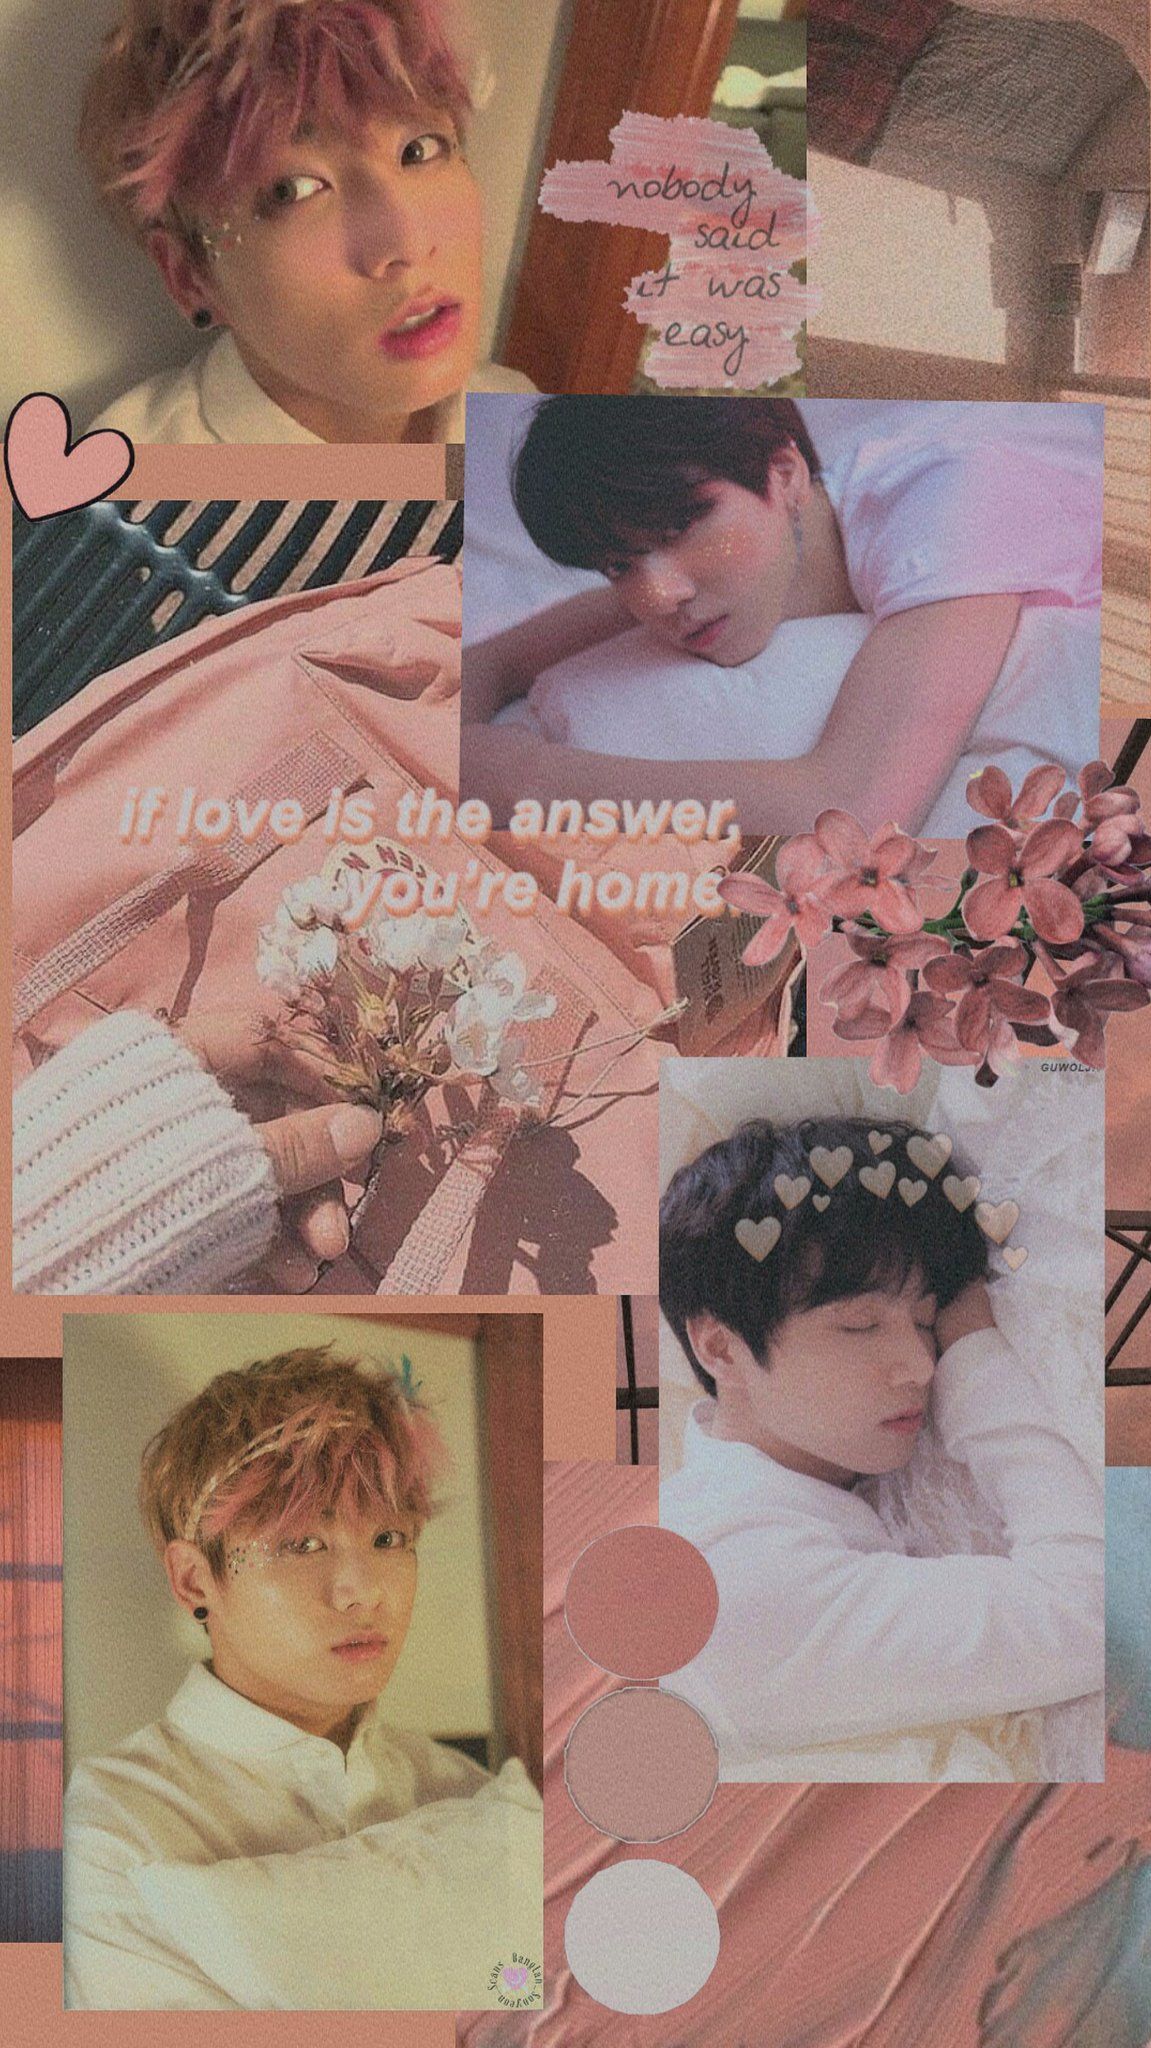 Made two aesthetic wallpaper inspired by the duality of jungkook. #jungkookaesthetic #jungkook #wallpaper